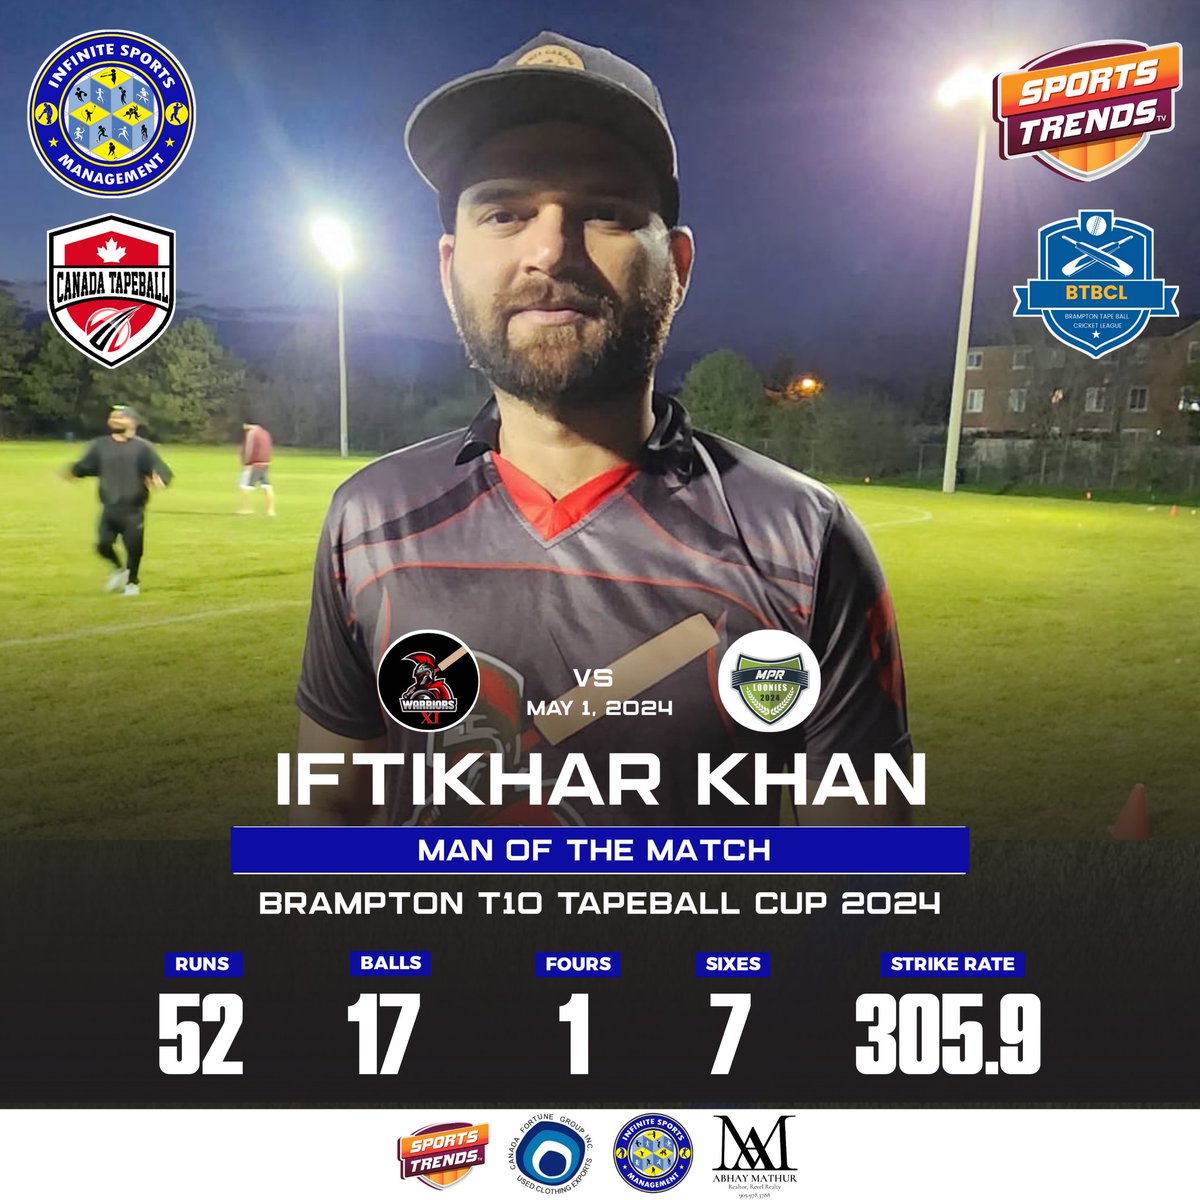 Iftikhar Khan - Man Of The Match in Canada Fortune - Brampton T10 TapeBall Cricket Cup 2024  🏆

#Cricket #BramptonT10TapeBallCricketCup #CanadaCricket #T10 #Tapeball #Brampton #SportsTrendsCan #SportsTrendsCanada